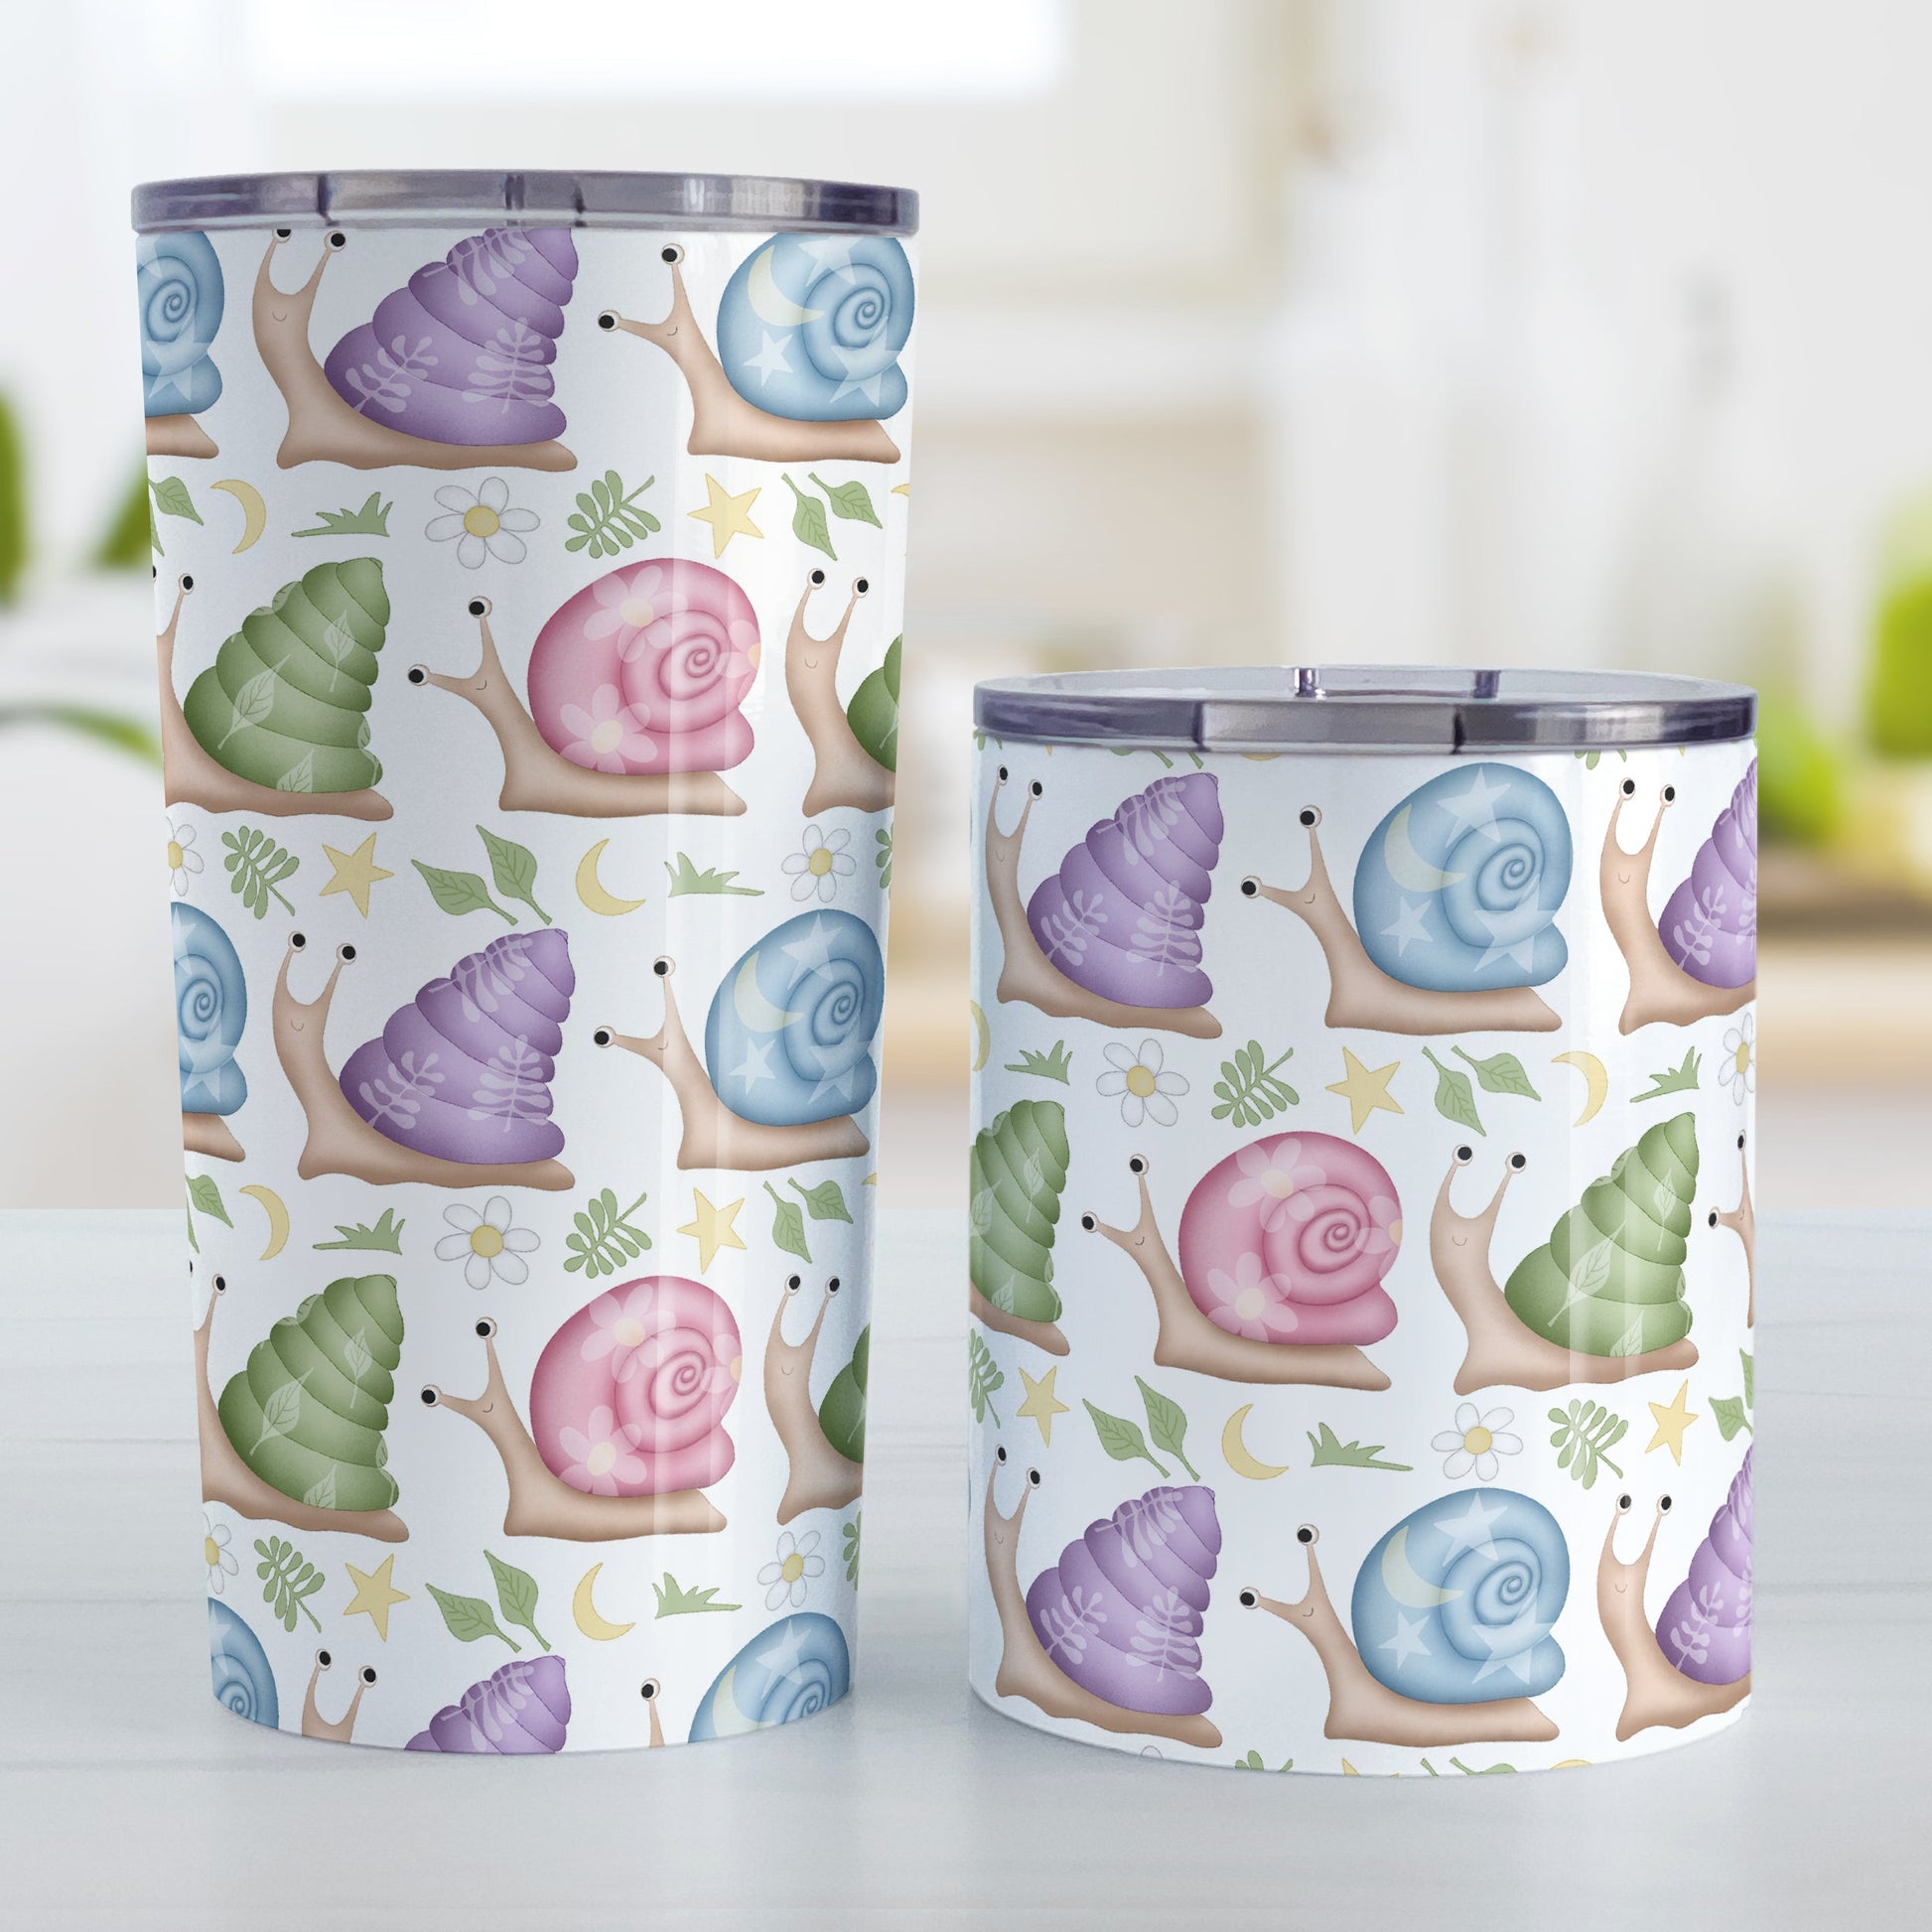 Cute Spring Summer Snails Pattern Tumbler Cup (20oz and 10oz, stainless steel insulated) at Amy's Coffee Mugs. Cute snails tumbler cups with a whimsical pattern of snails with happy faces in rows around the cups with pink, purple, blue, and green shells floral and stars watermarks, with foliage, moons, and stars between the rows. The two sizes of cups are displayed next to each other.